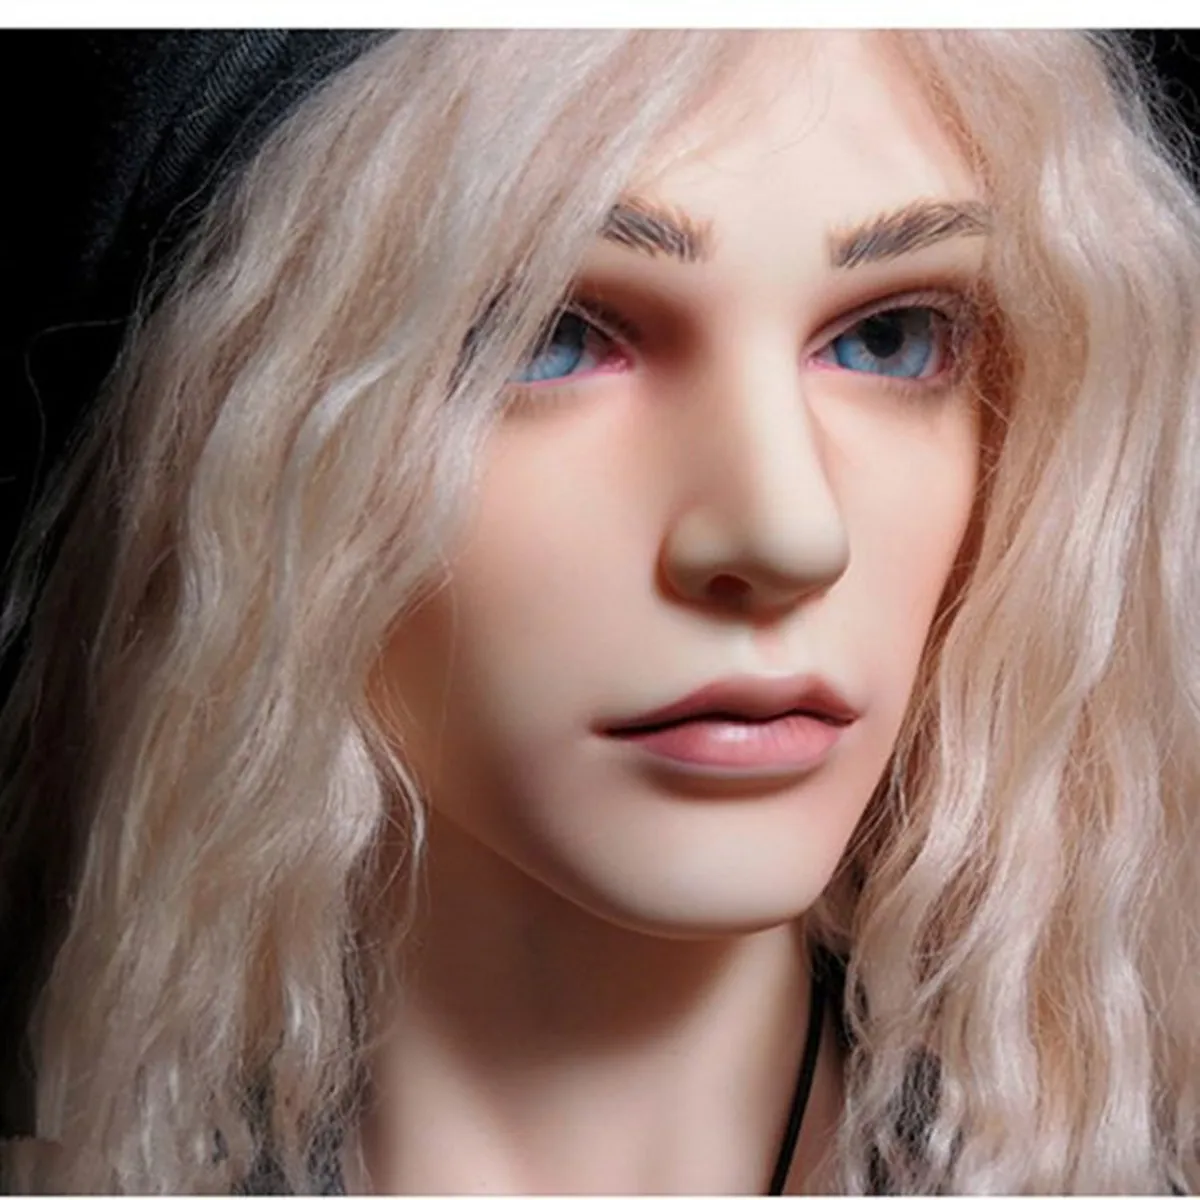 

2019 New shelves Advanced resin bjd doll / sd doll 3 points boy with joint doll